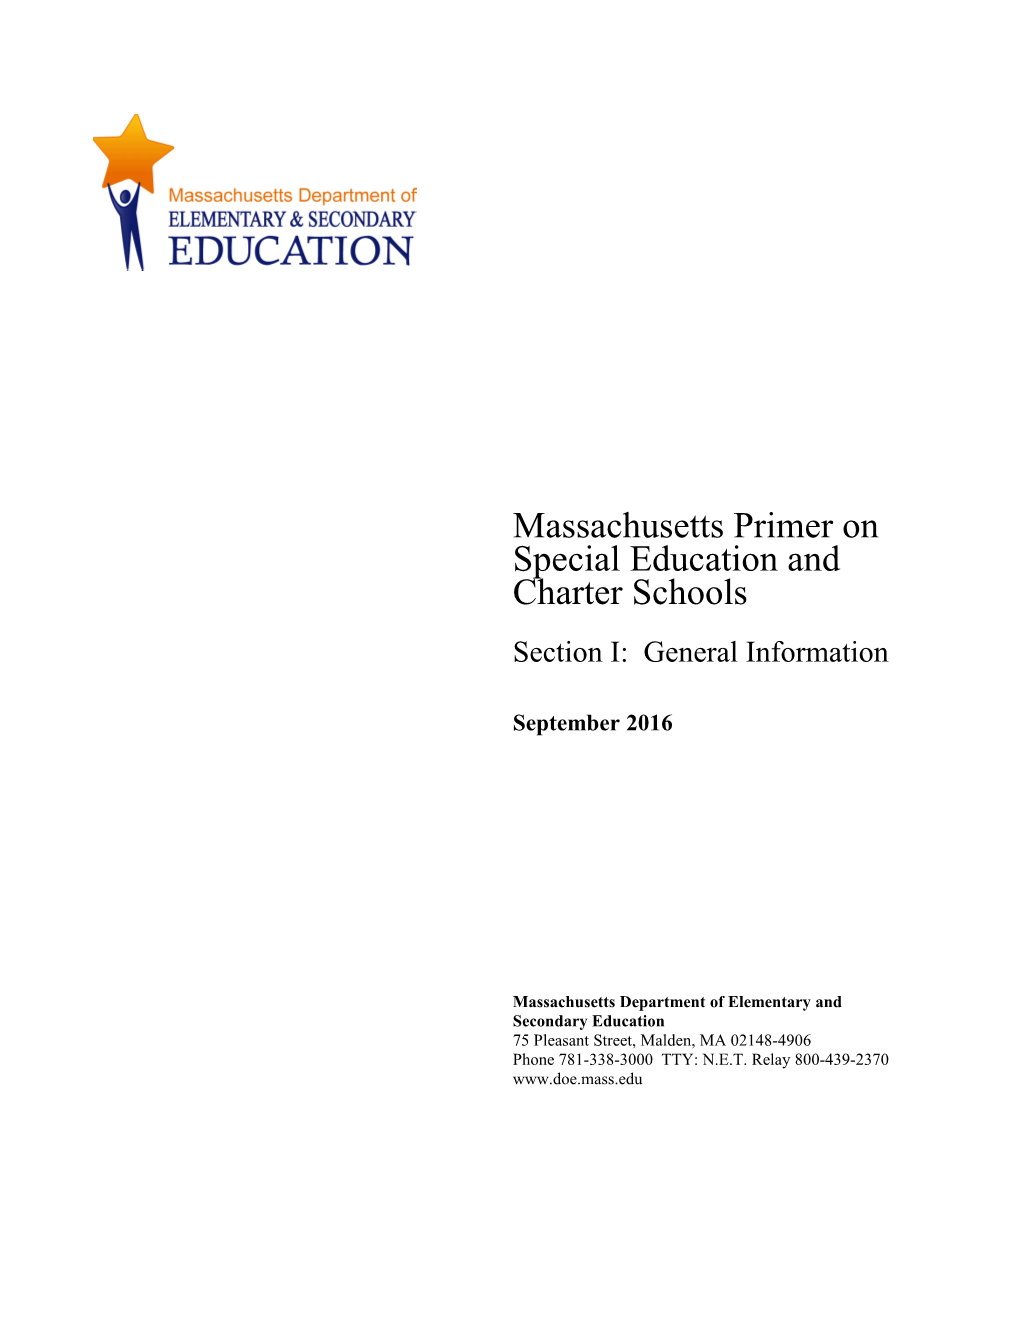 Massachusetts Primer on Special Education and Charter Schools Part I: General Information